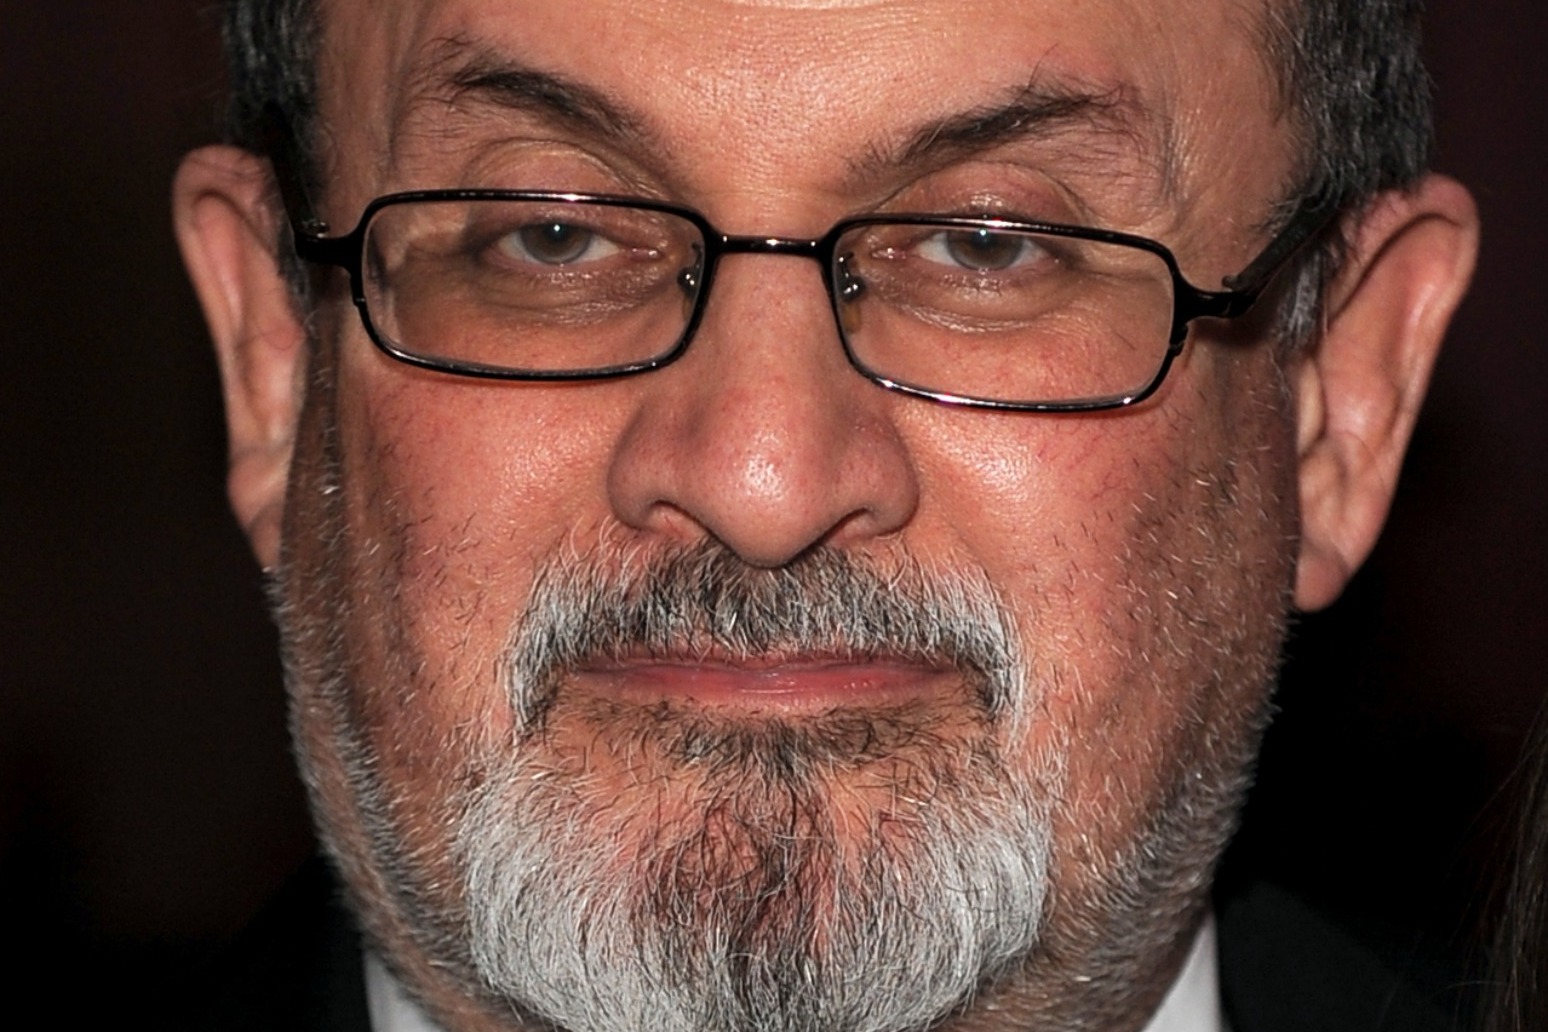 Novelist Salman Rushdie stabbed on lecture stage in New York